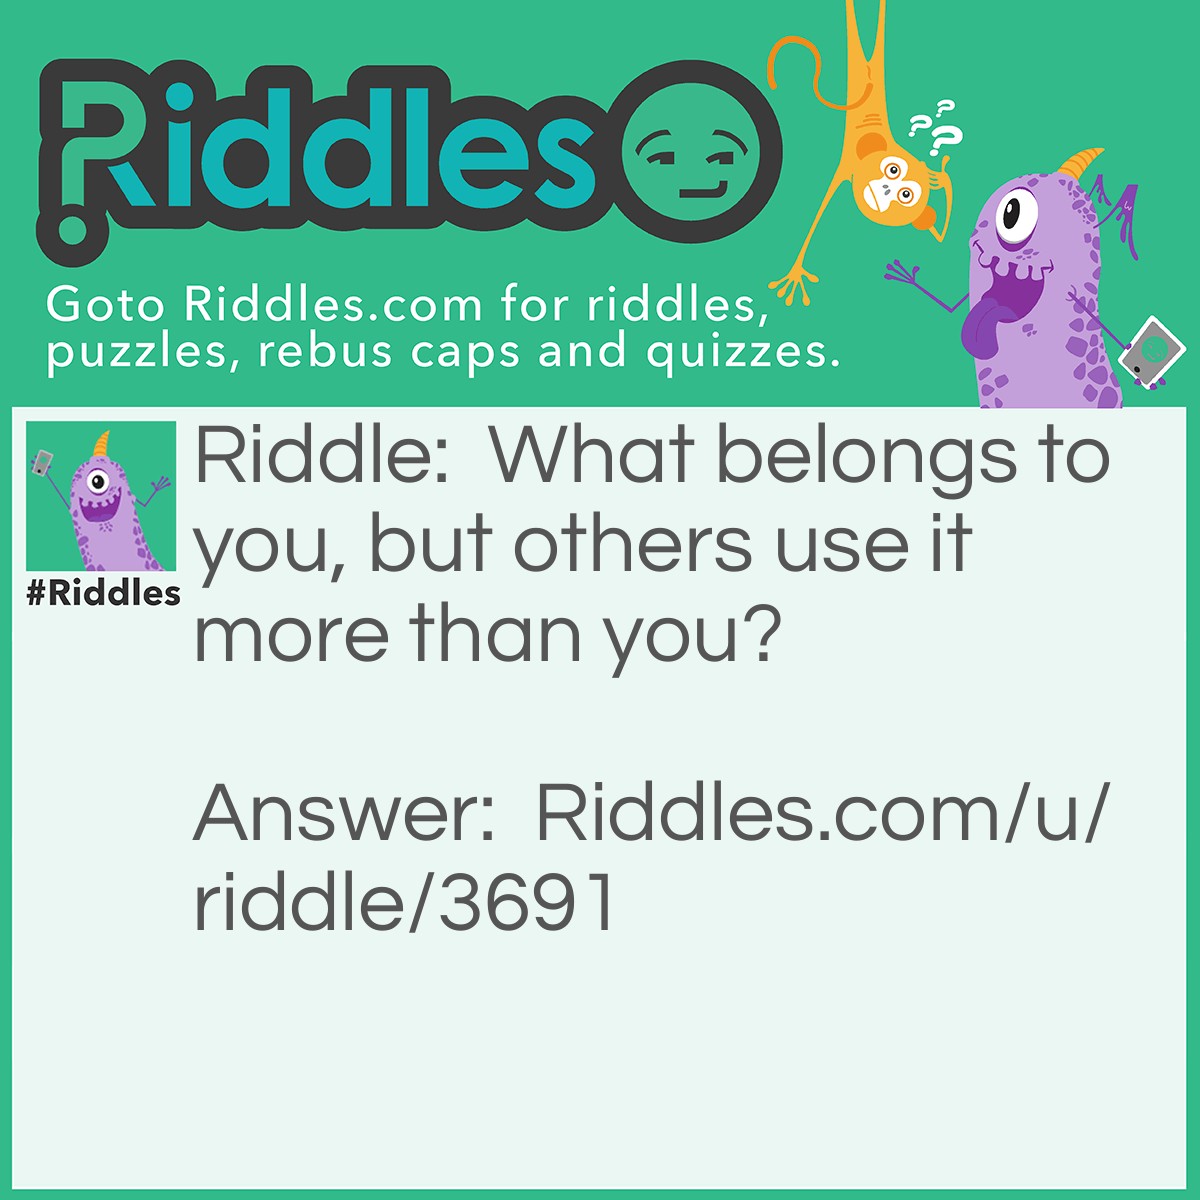 Riddle: What belongs to you, but others use it more than you? Answer: Your name.